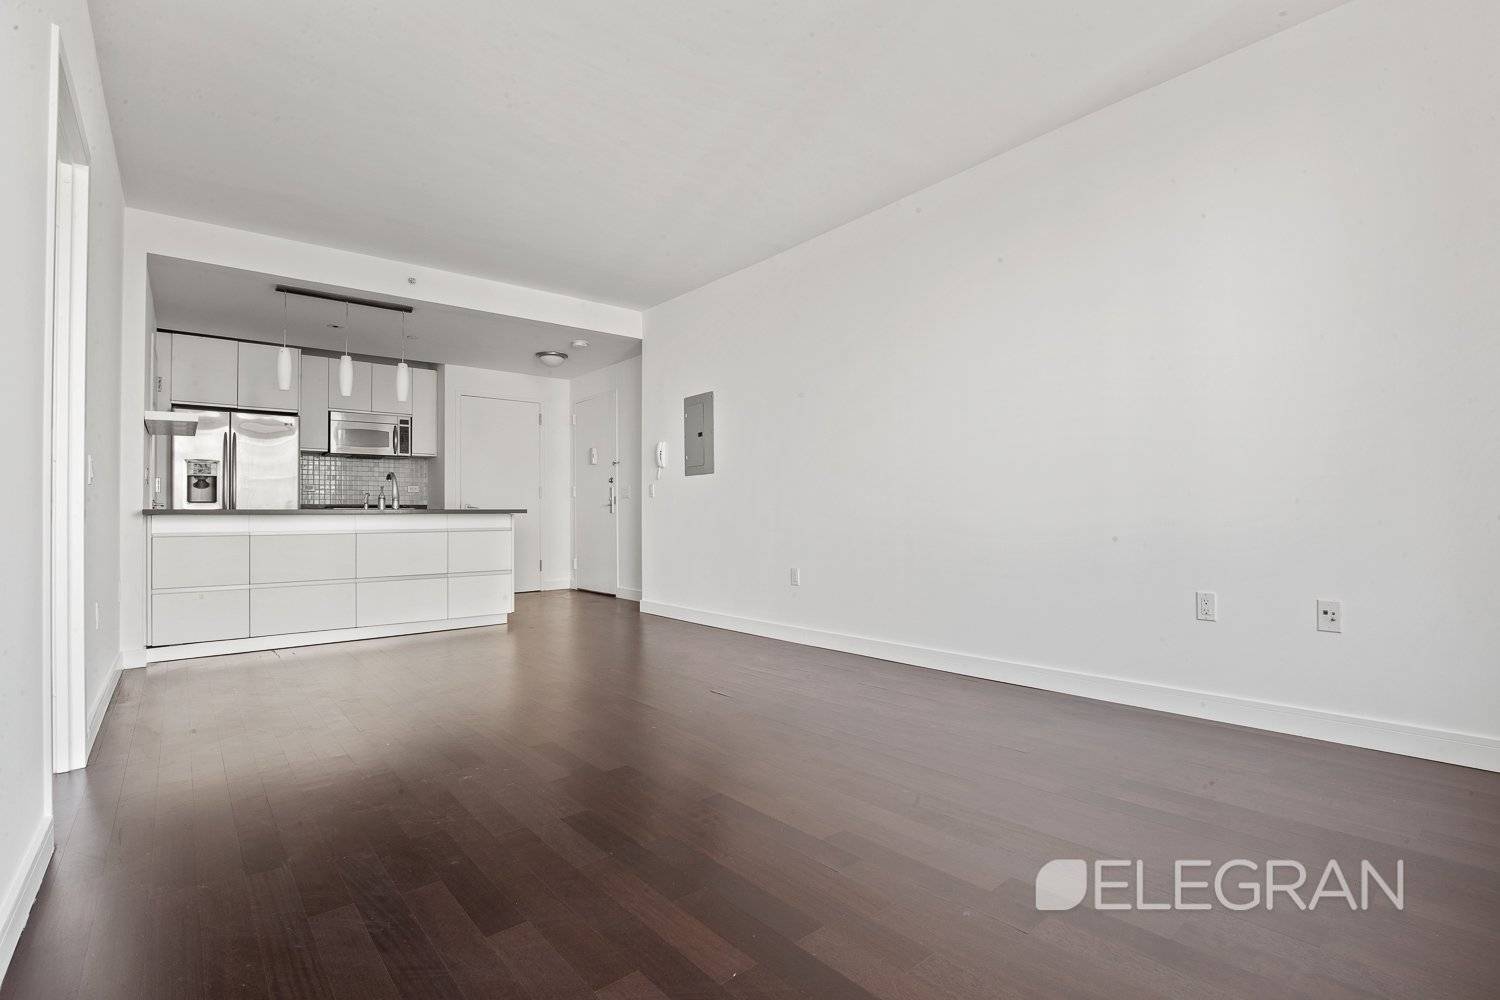 This spacious and bright one bedroom apartment soars over downtown Brooklyn, offering a magnificent Eastern view of the Williamsburg Bridge and Fort Greene Park.